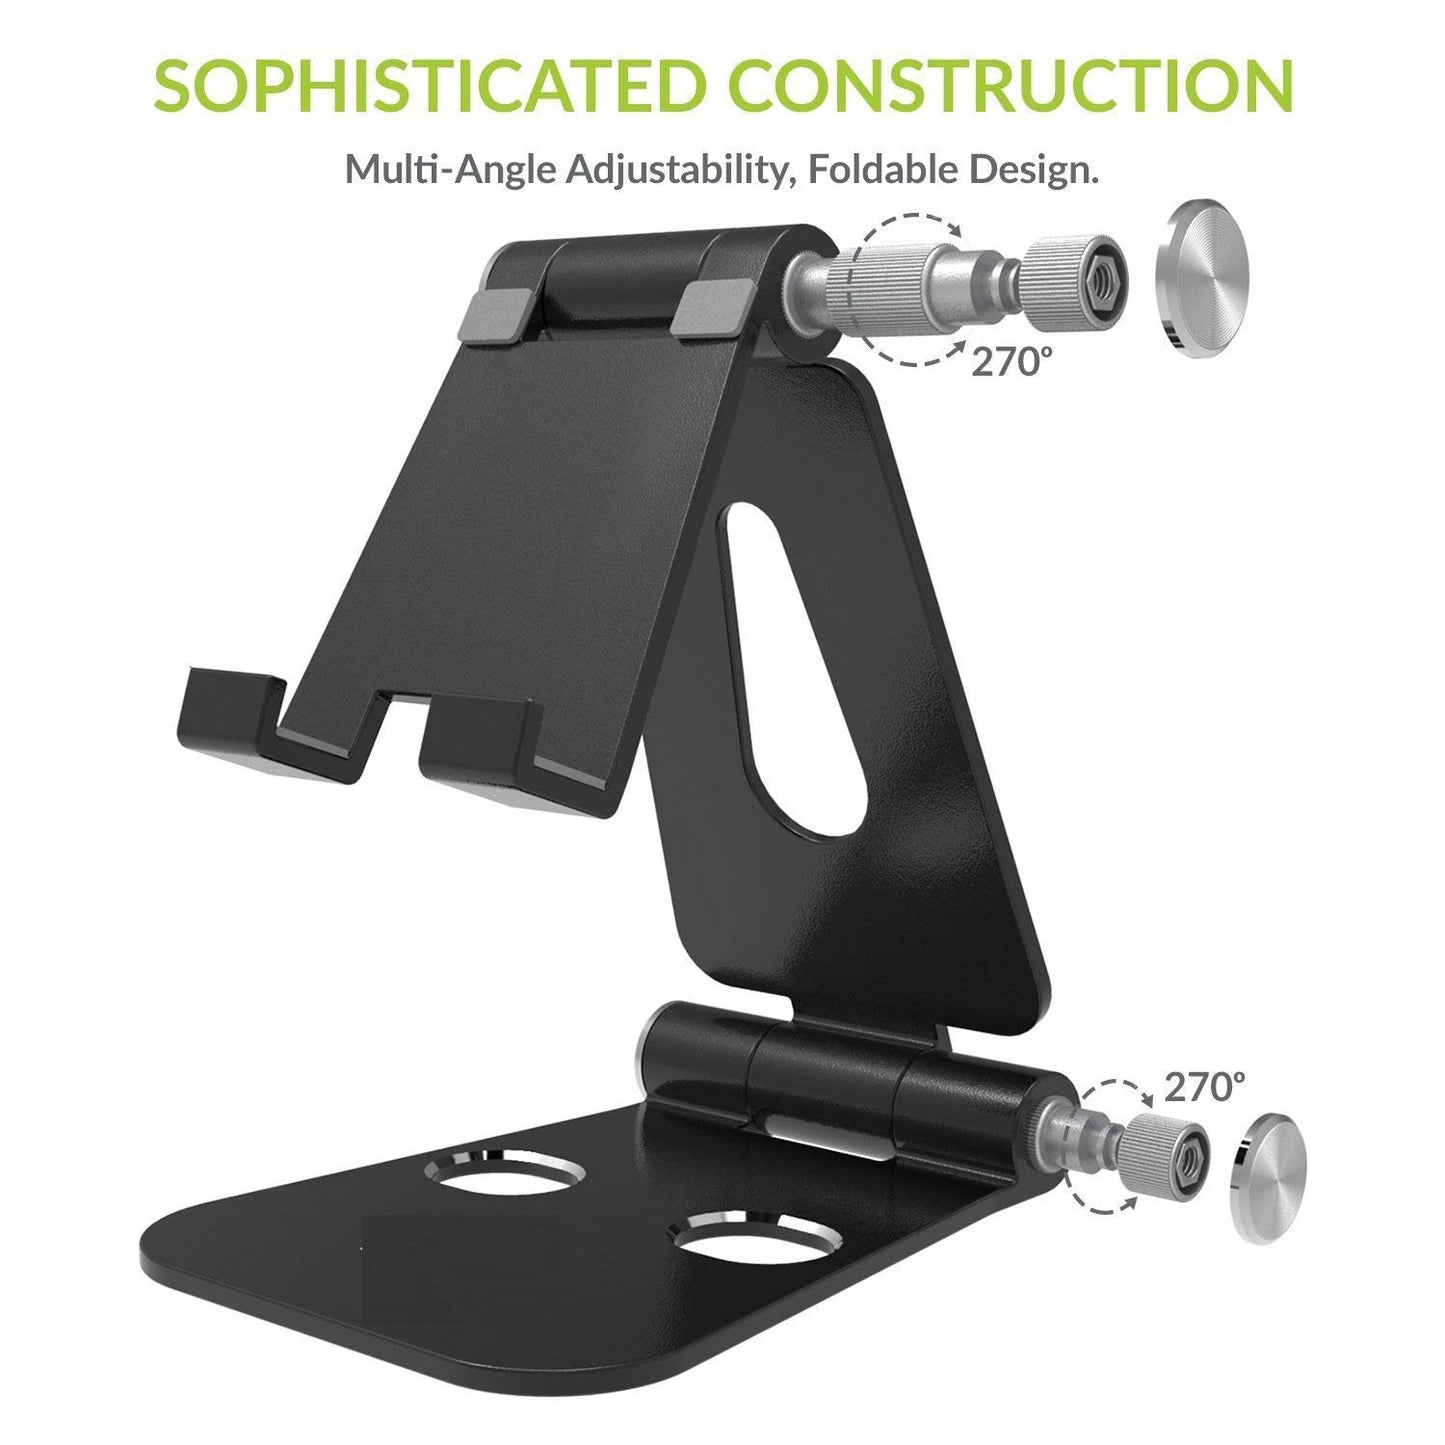 Foldable Swivel Mobile Stand - Scraften